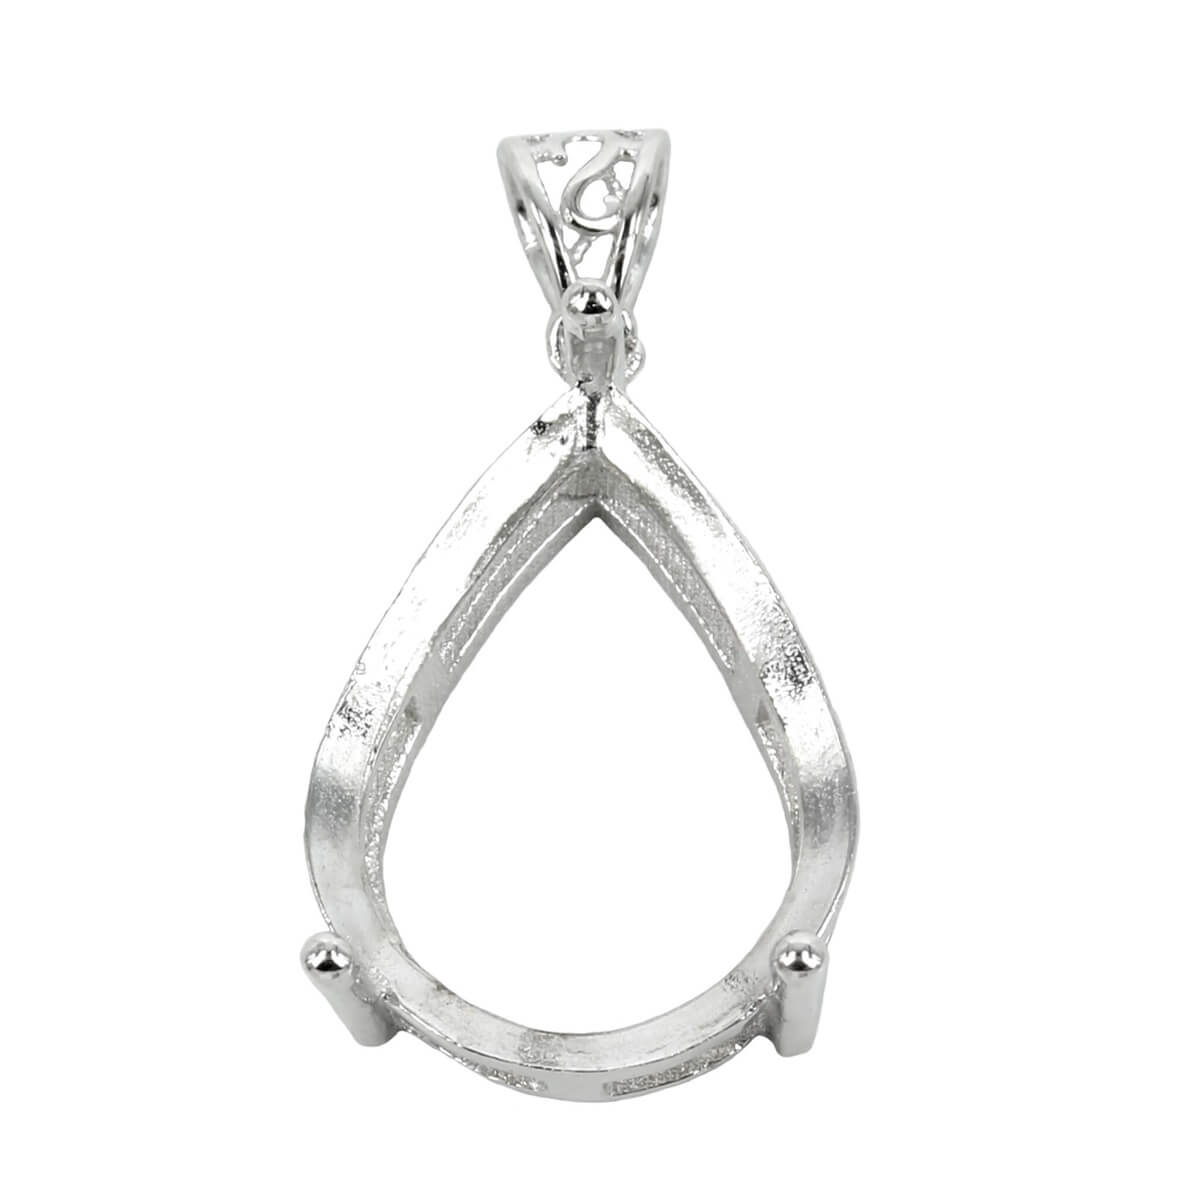 Pear Shaped Basket Setting Pendant with Soldered Loop and Fancy Bail in Sterling Silver